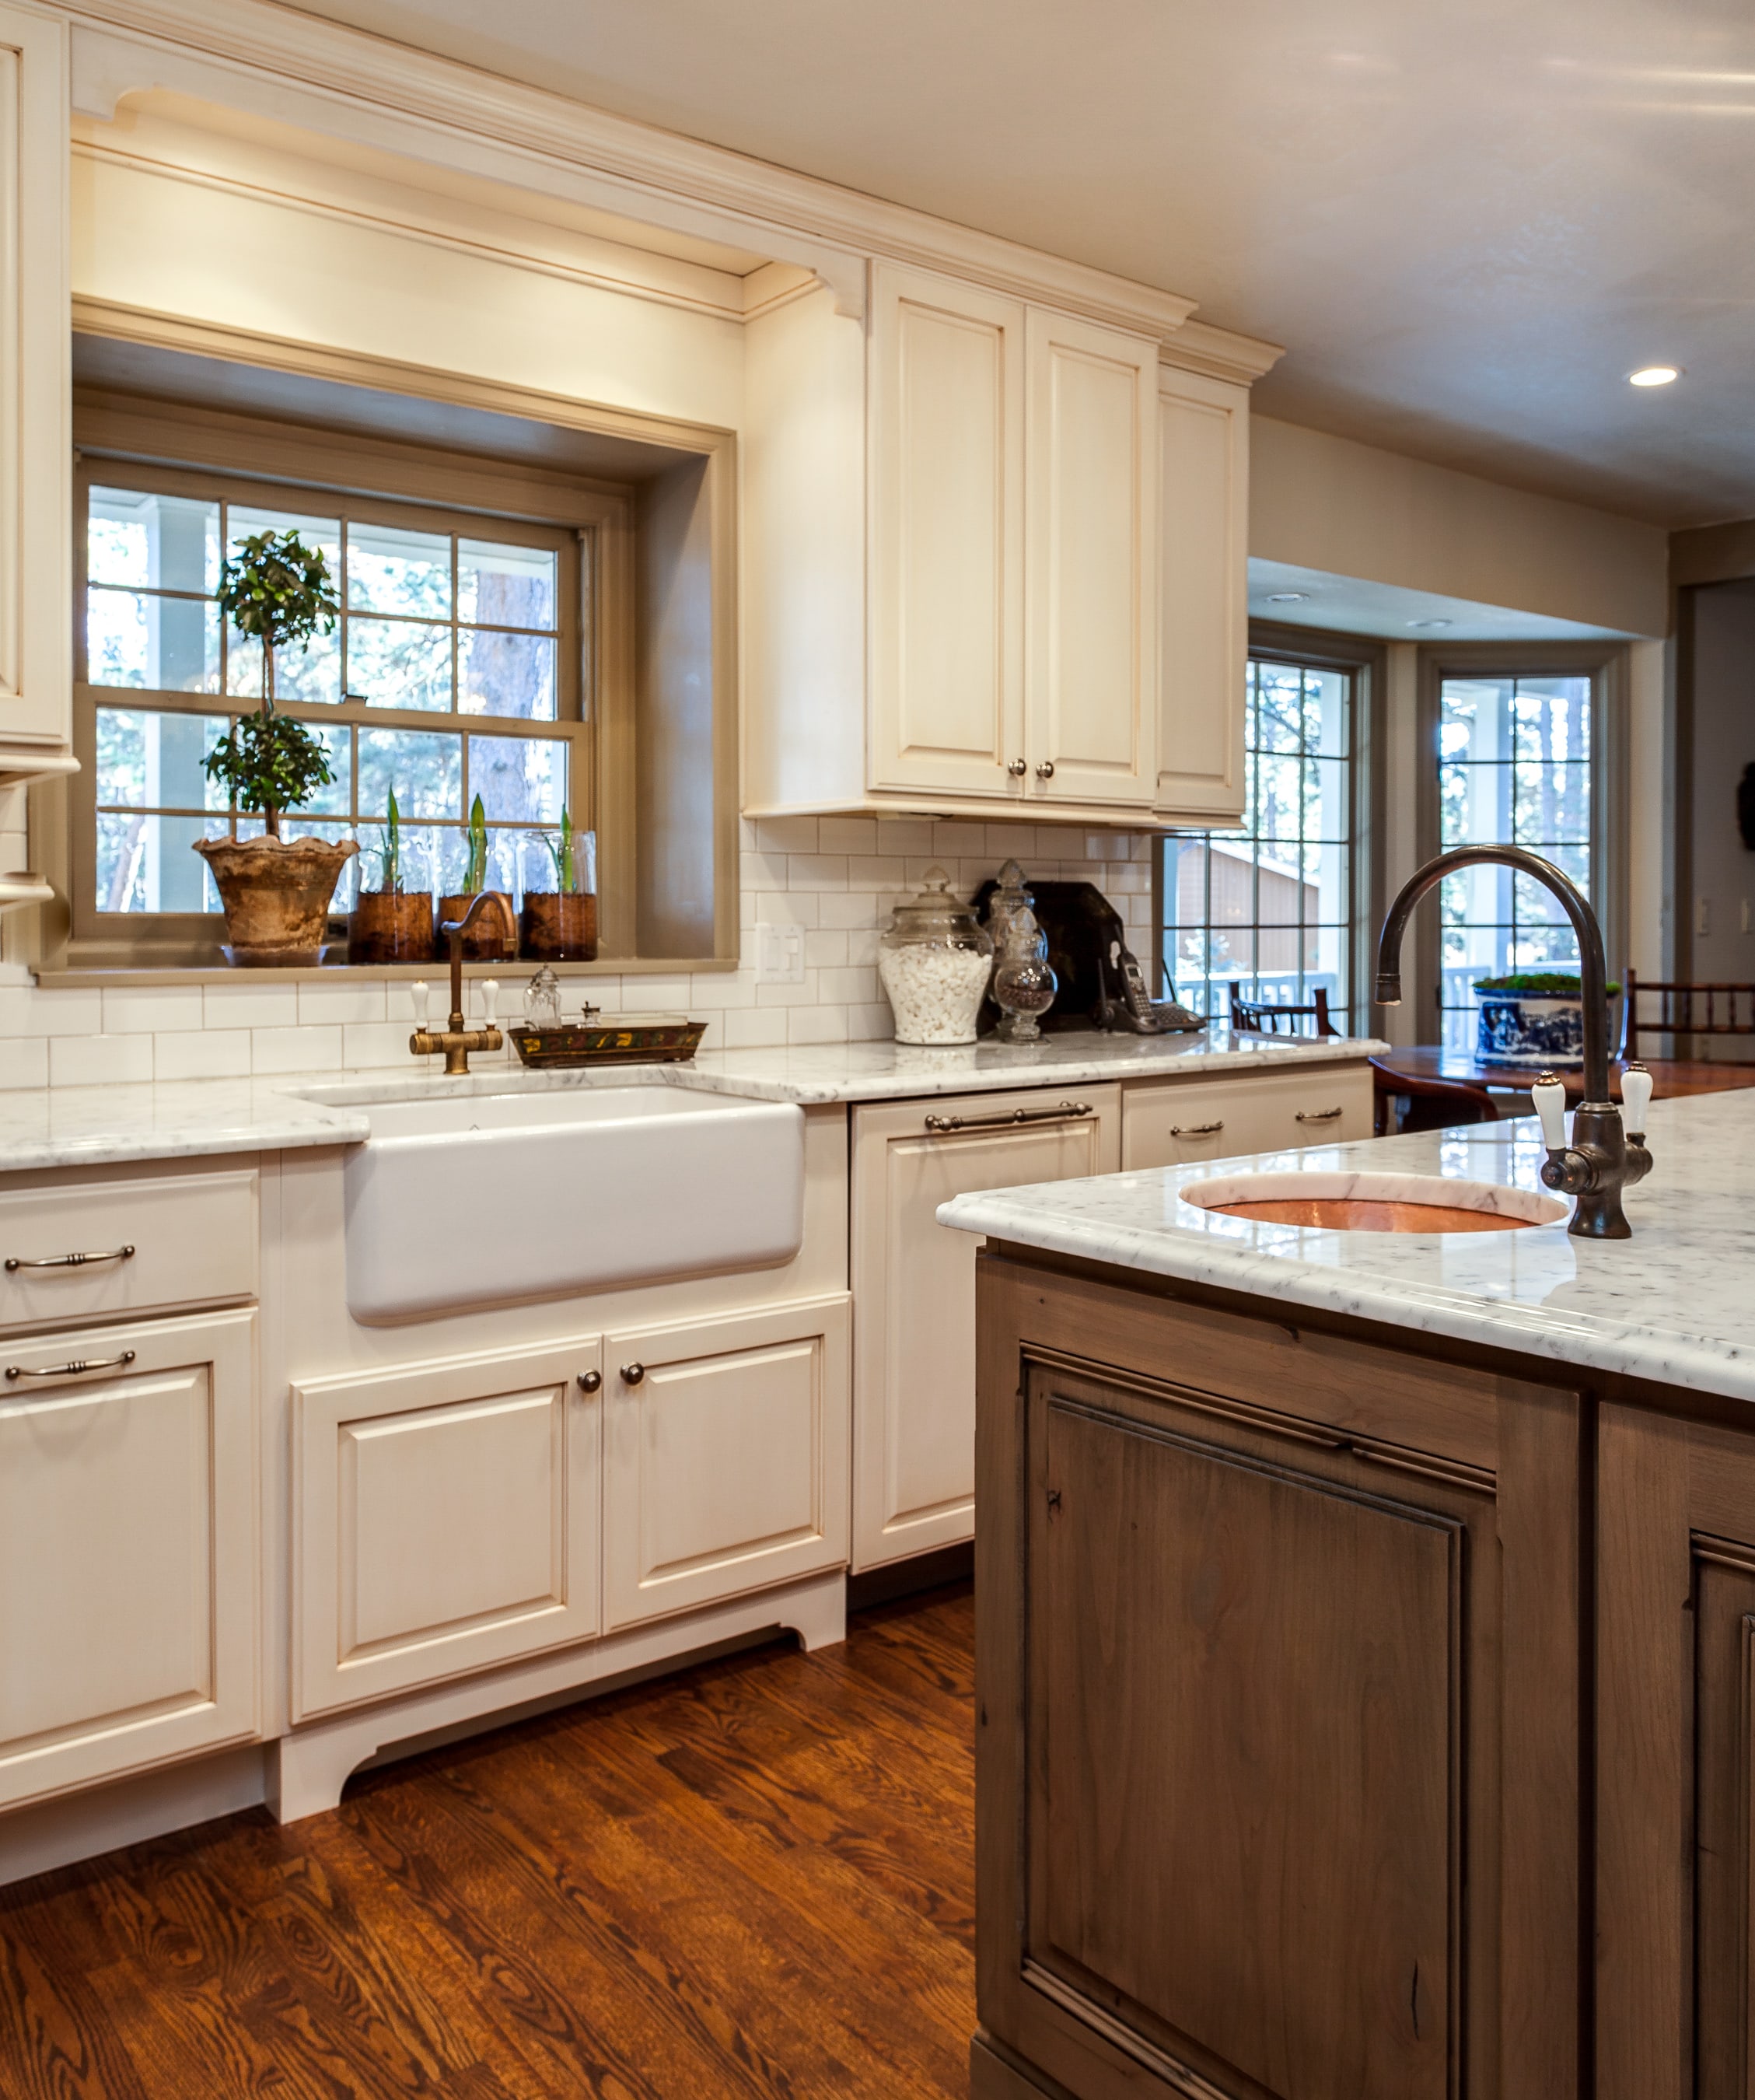 Cabinet Maintenance How To Clean And Care For Your Cabinetry